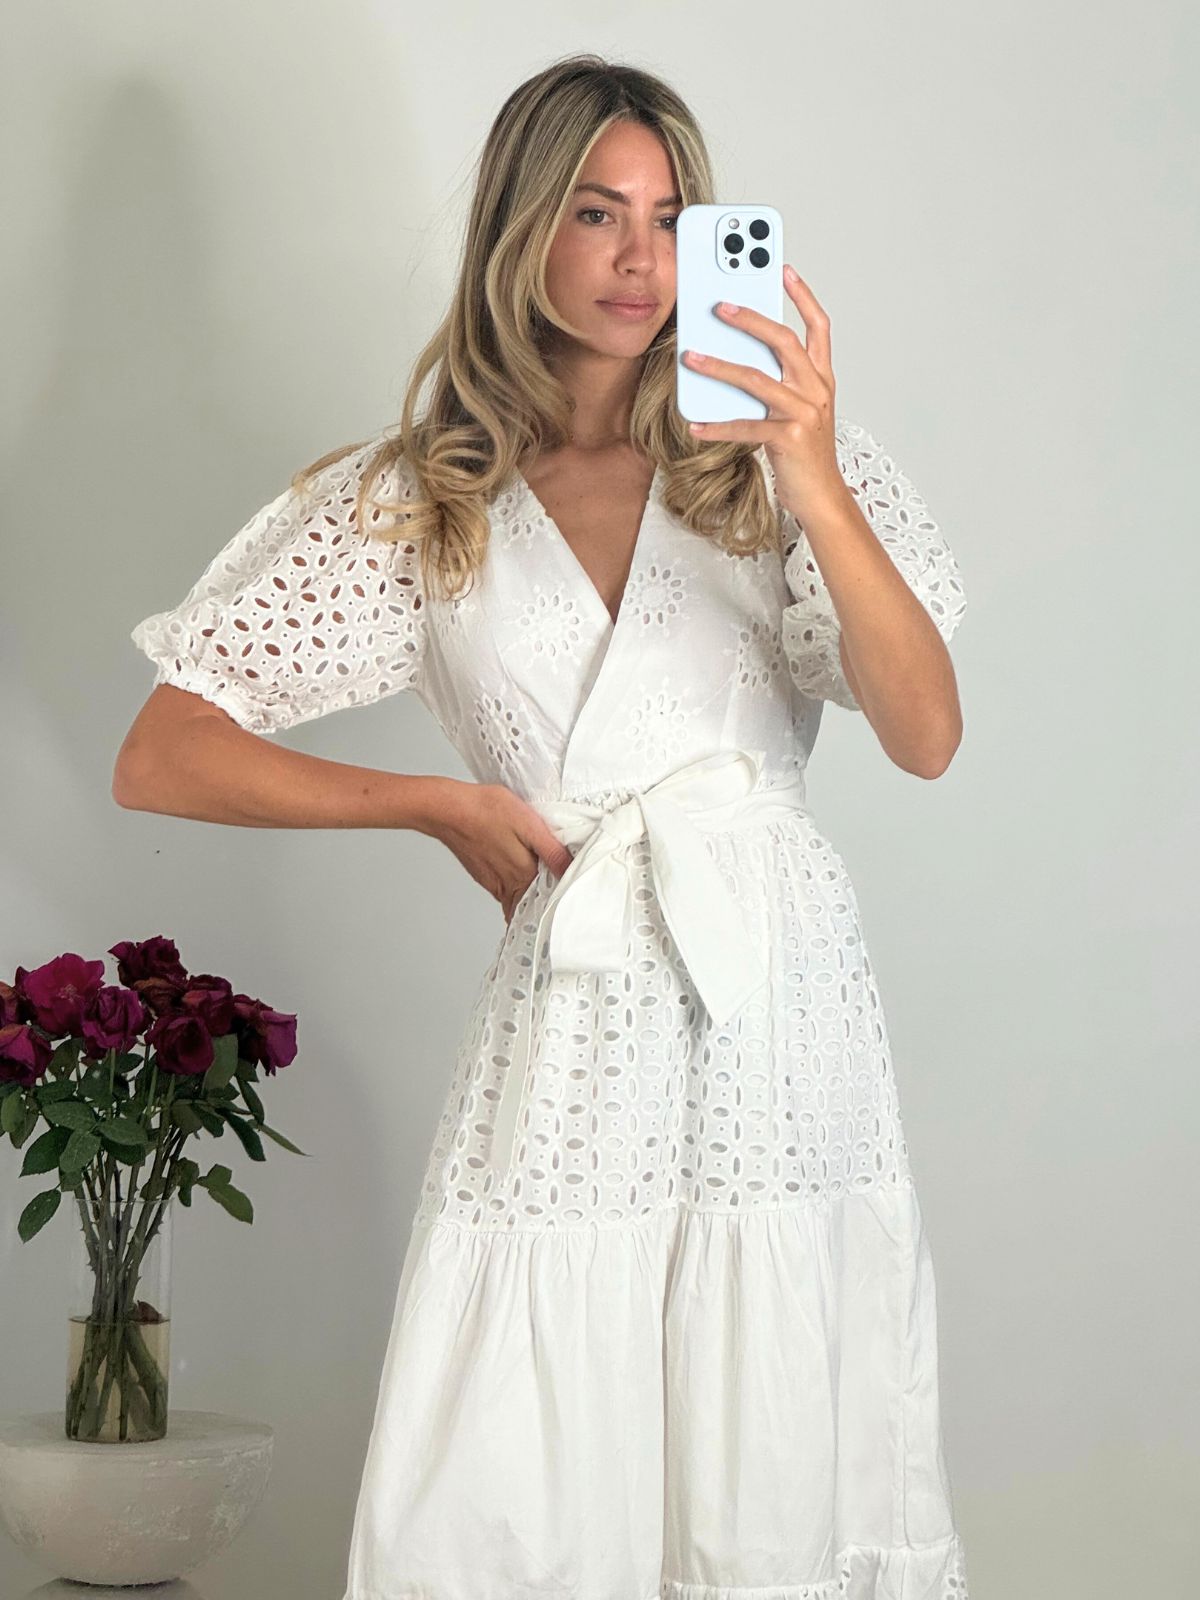 Claudia Puff Sleeve Broderie Midaxi Dress in White